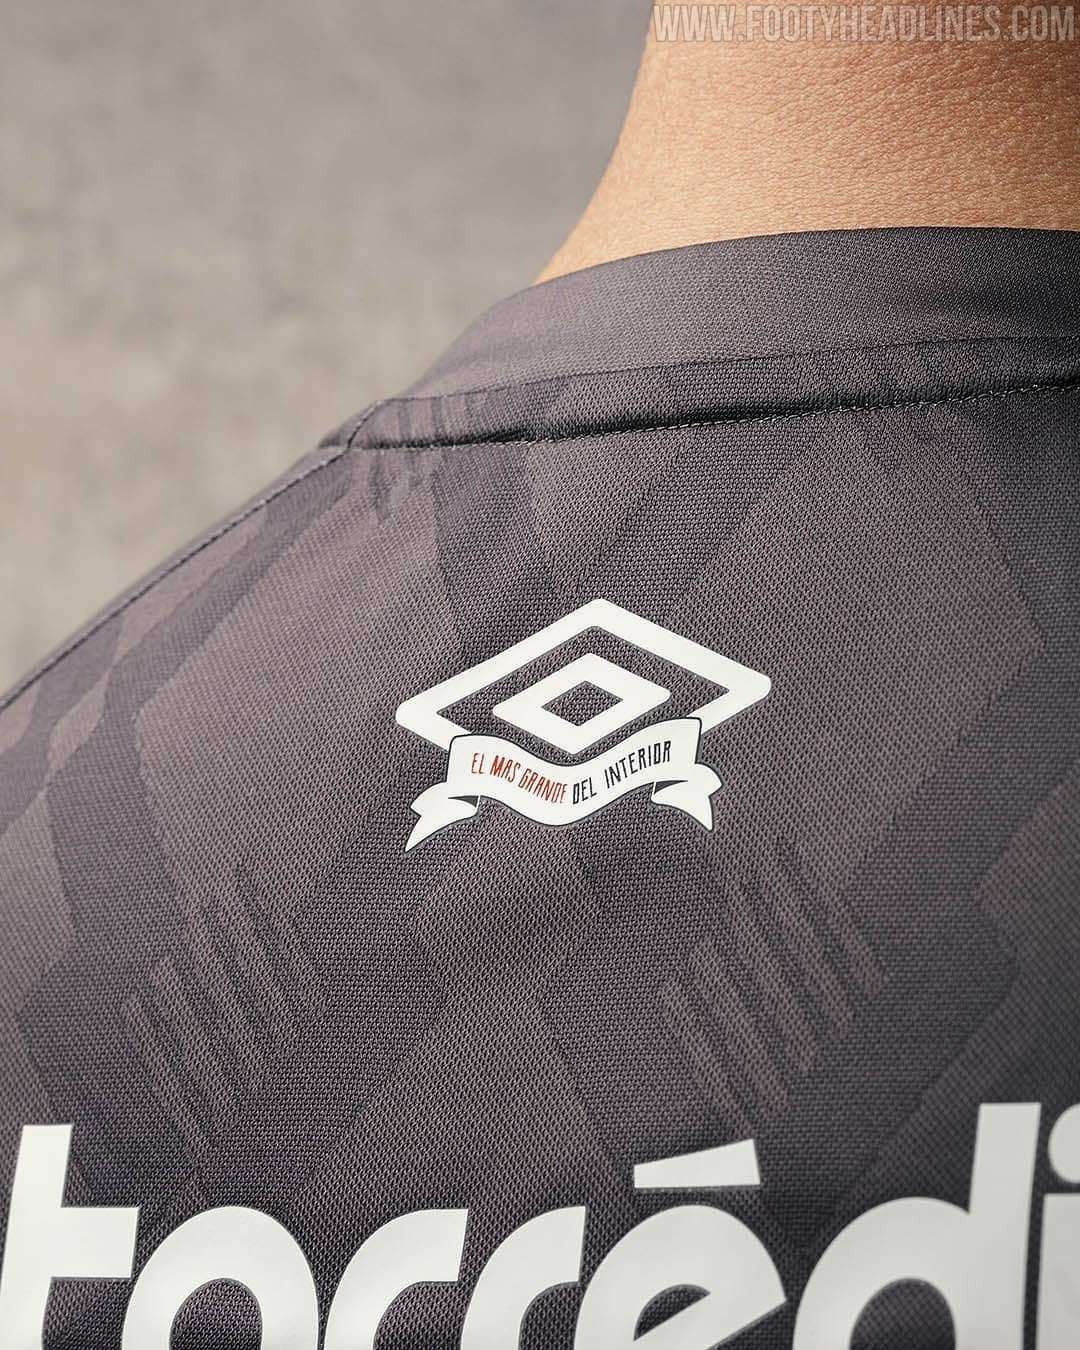 Newell's Old Boys 20-21 Third Kit Released - Footy Headlines